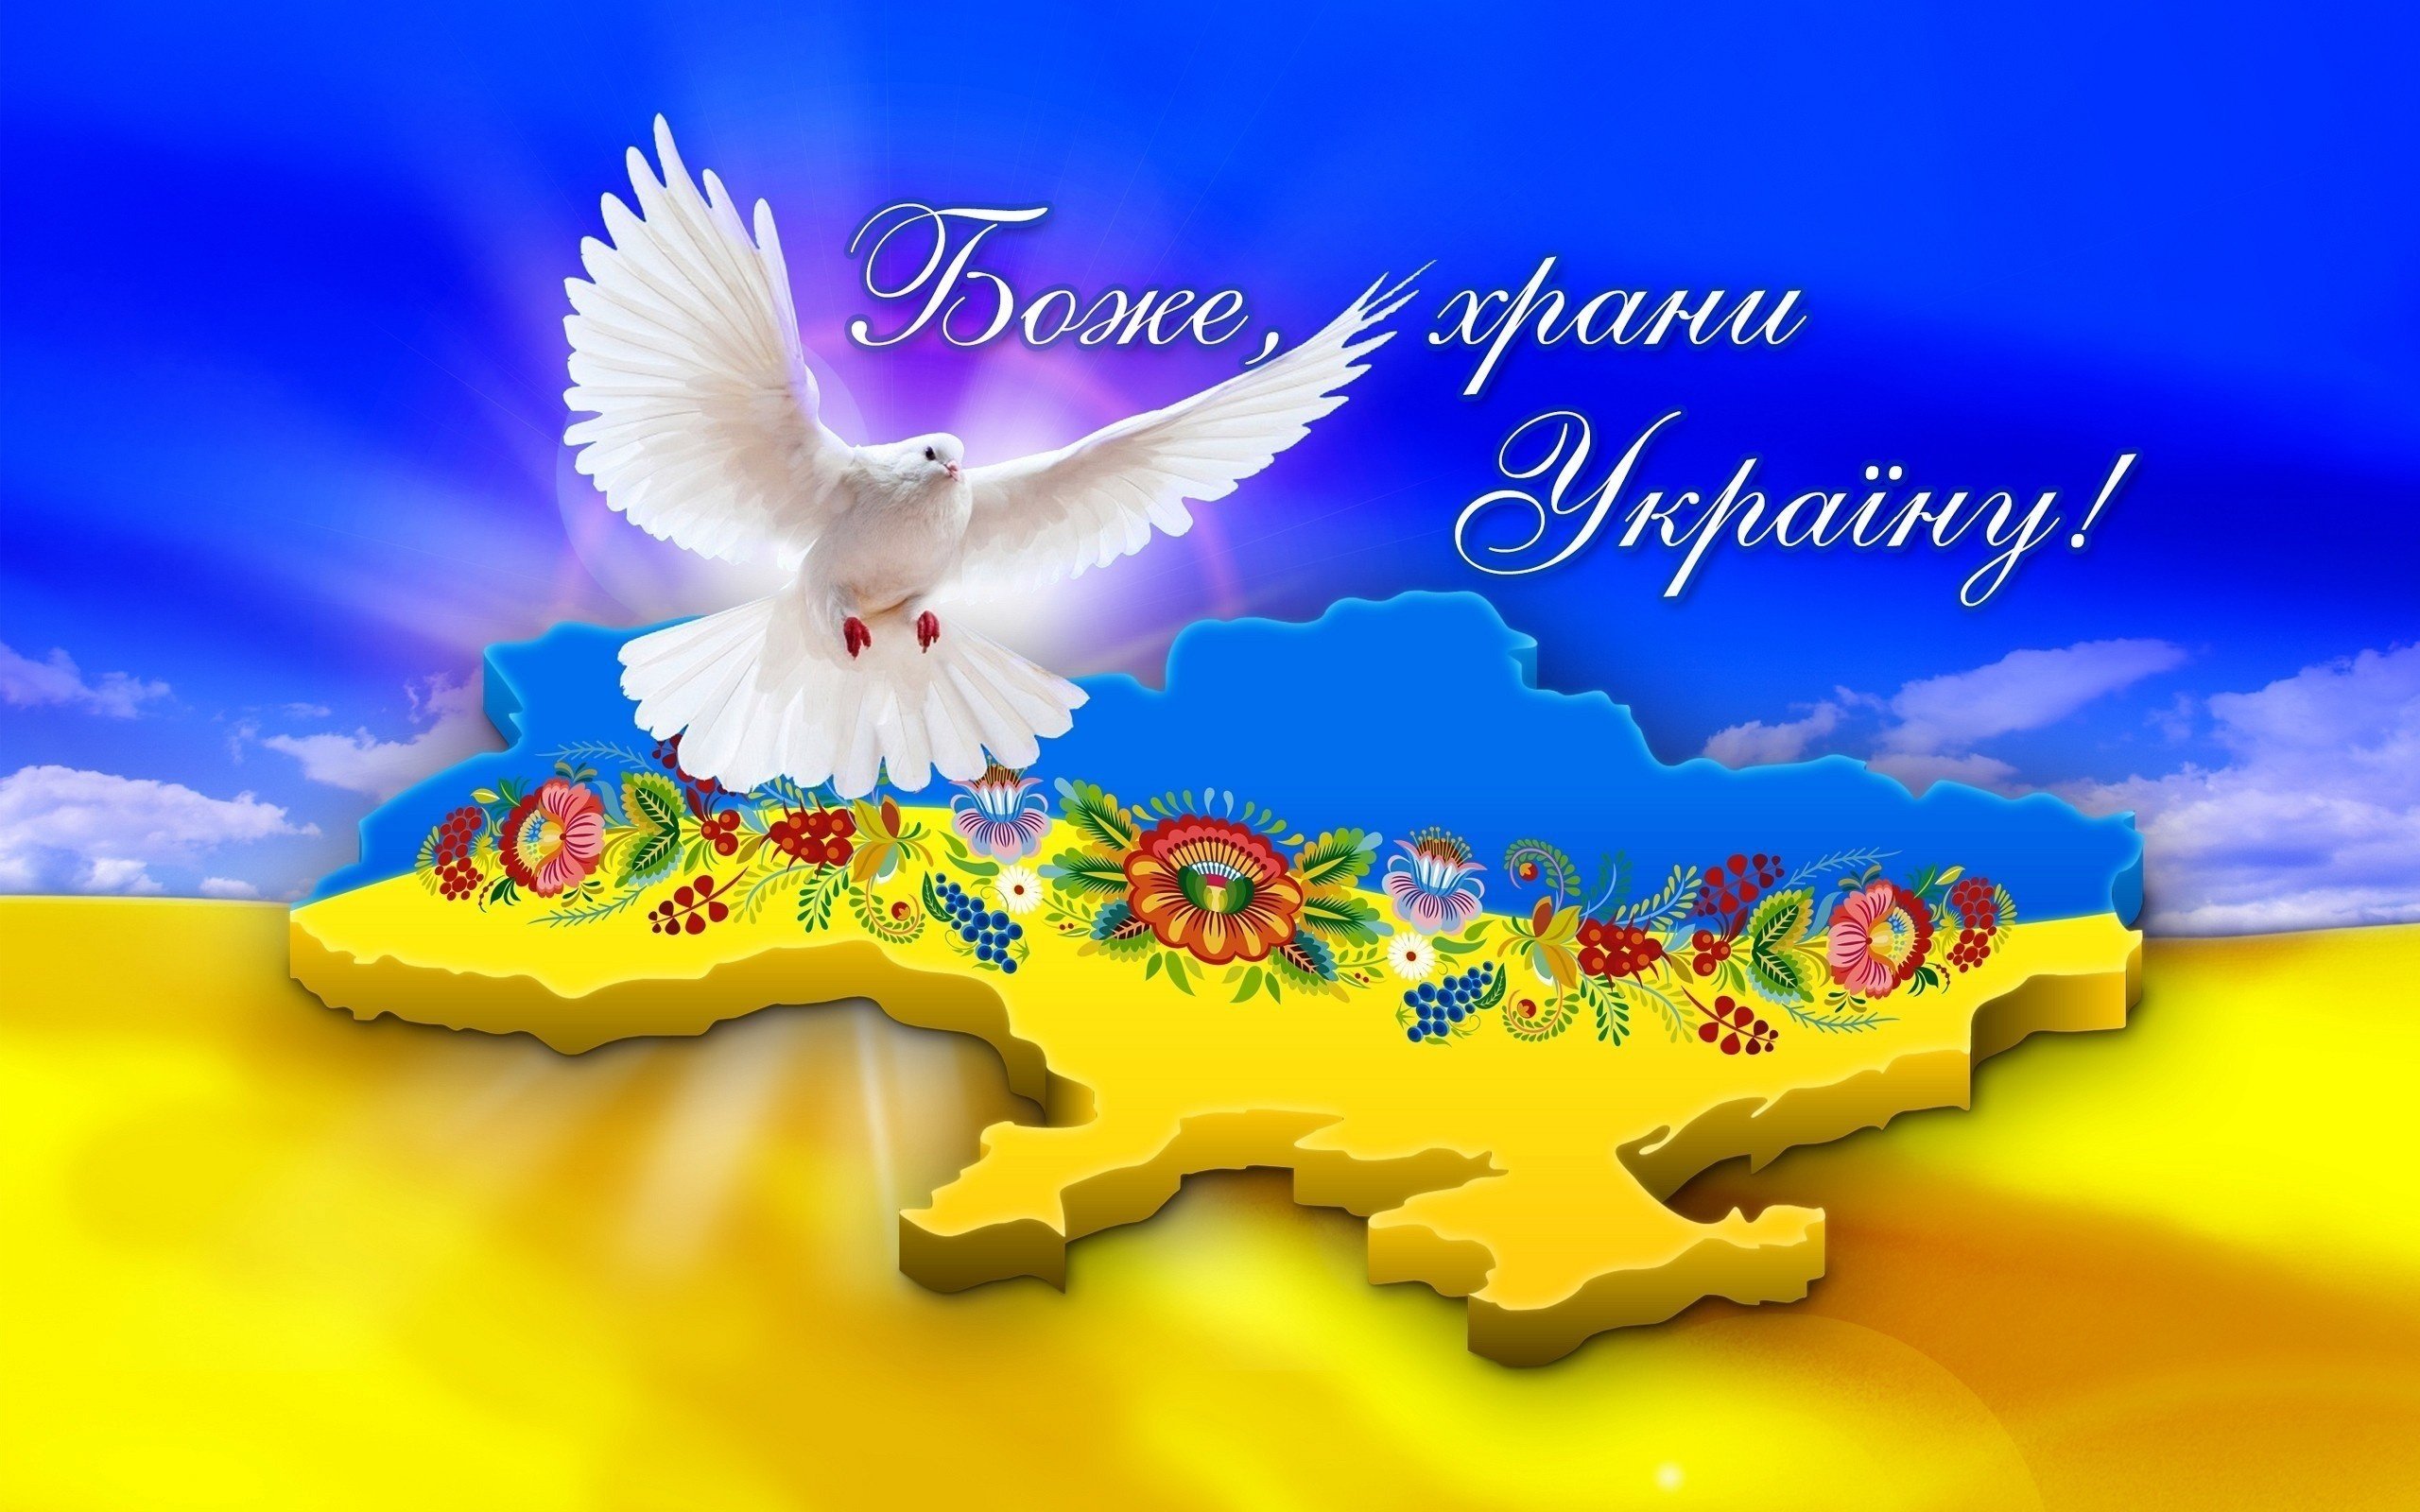 ukraine, A, Country, Patterns, Lettering, Words, Dove, Blue, Yellow ...